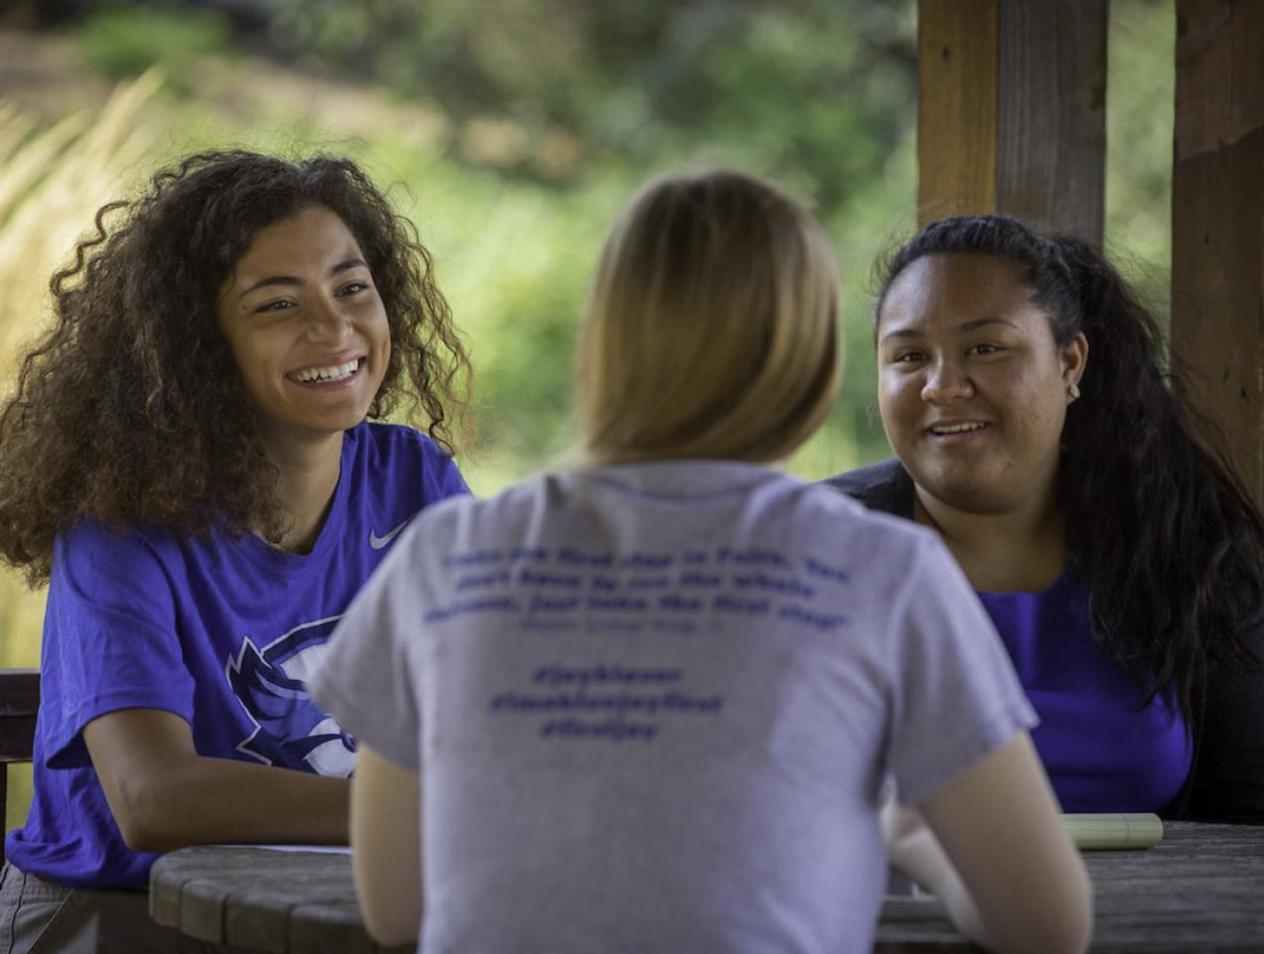 Female students smiling and talking at outdoor table